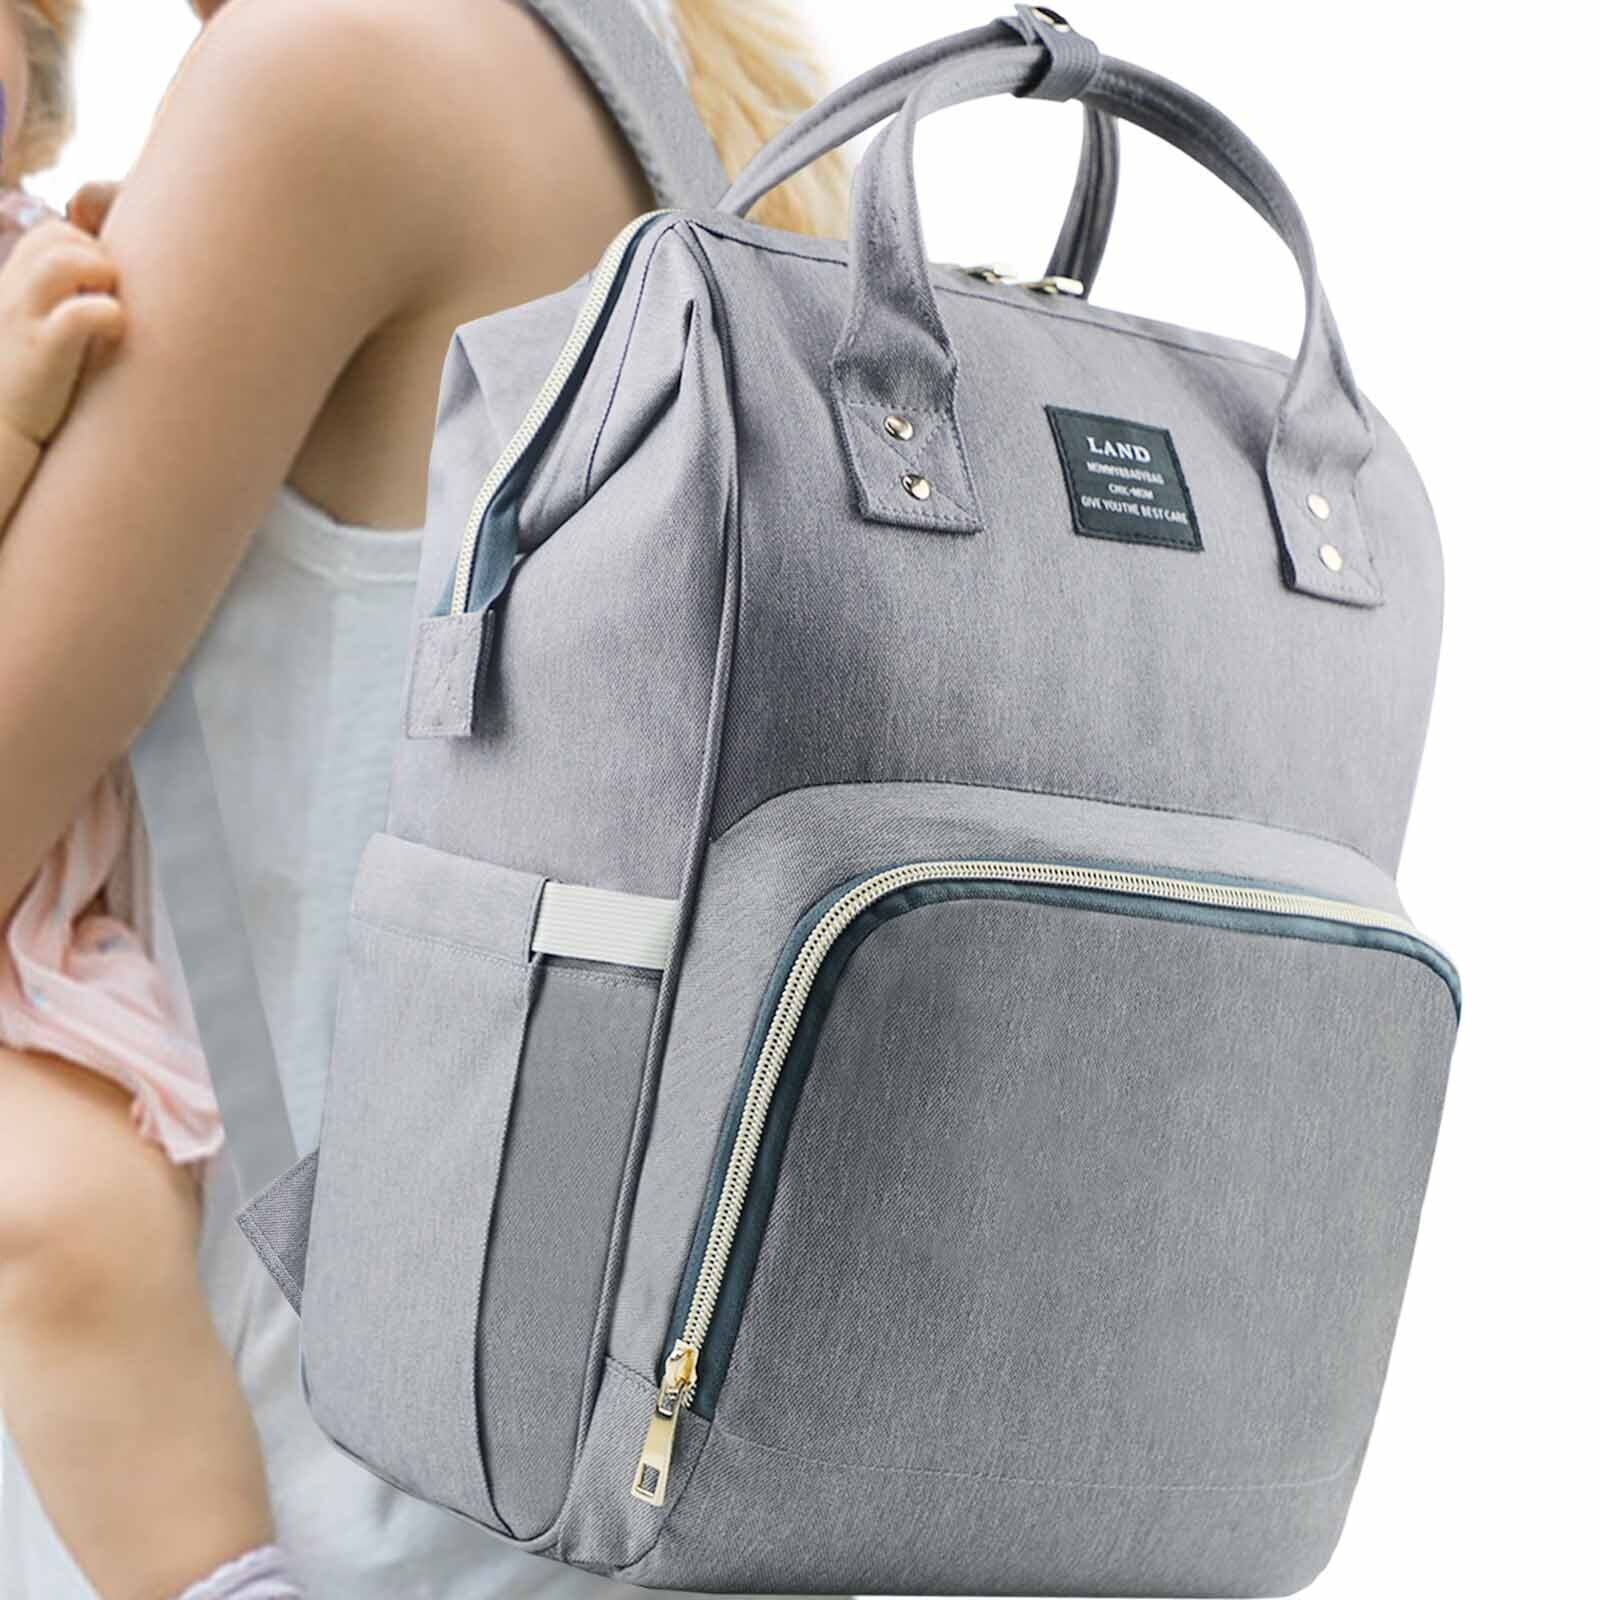 Multi-Functional Travel Knapsack Insulated Pockets Grey Wet/Dry Bag Stylish and Durable Large Capacity Baby Diaper Bag with Anti-Water Material Diaper Bag Backpack 